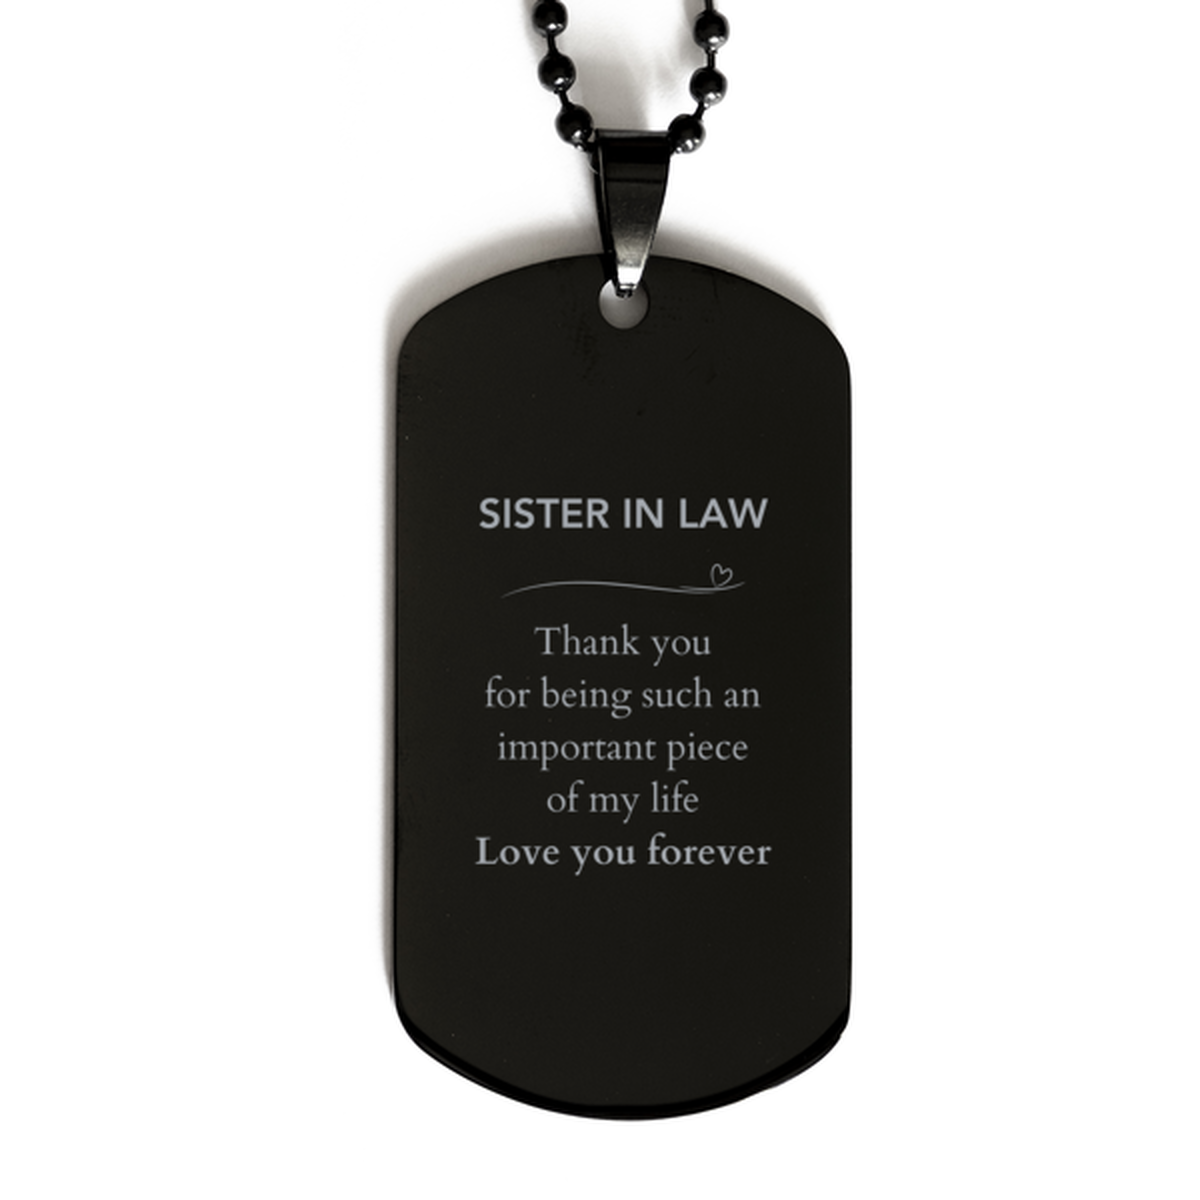 Appropriate Sister In Law Black Dog Tag Epic Birthday Gifts for Sister In Law Thank you for being such an important piece of my life Sister In Law Christmas Mothers Fathers Day